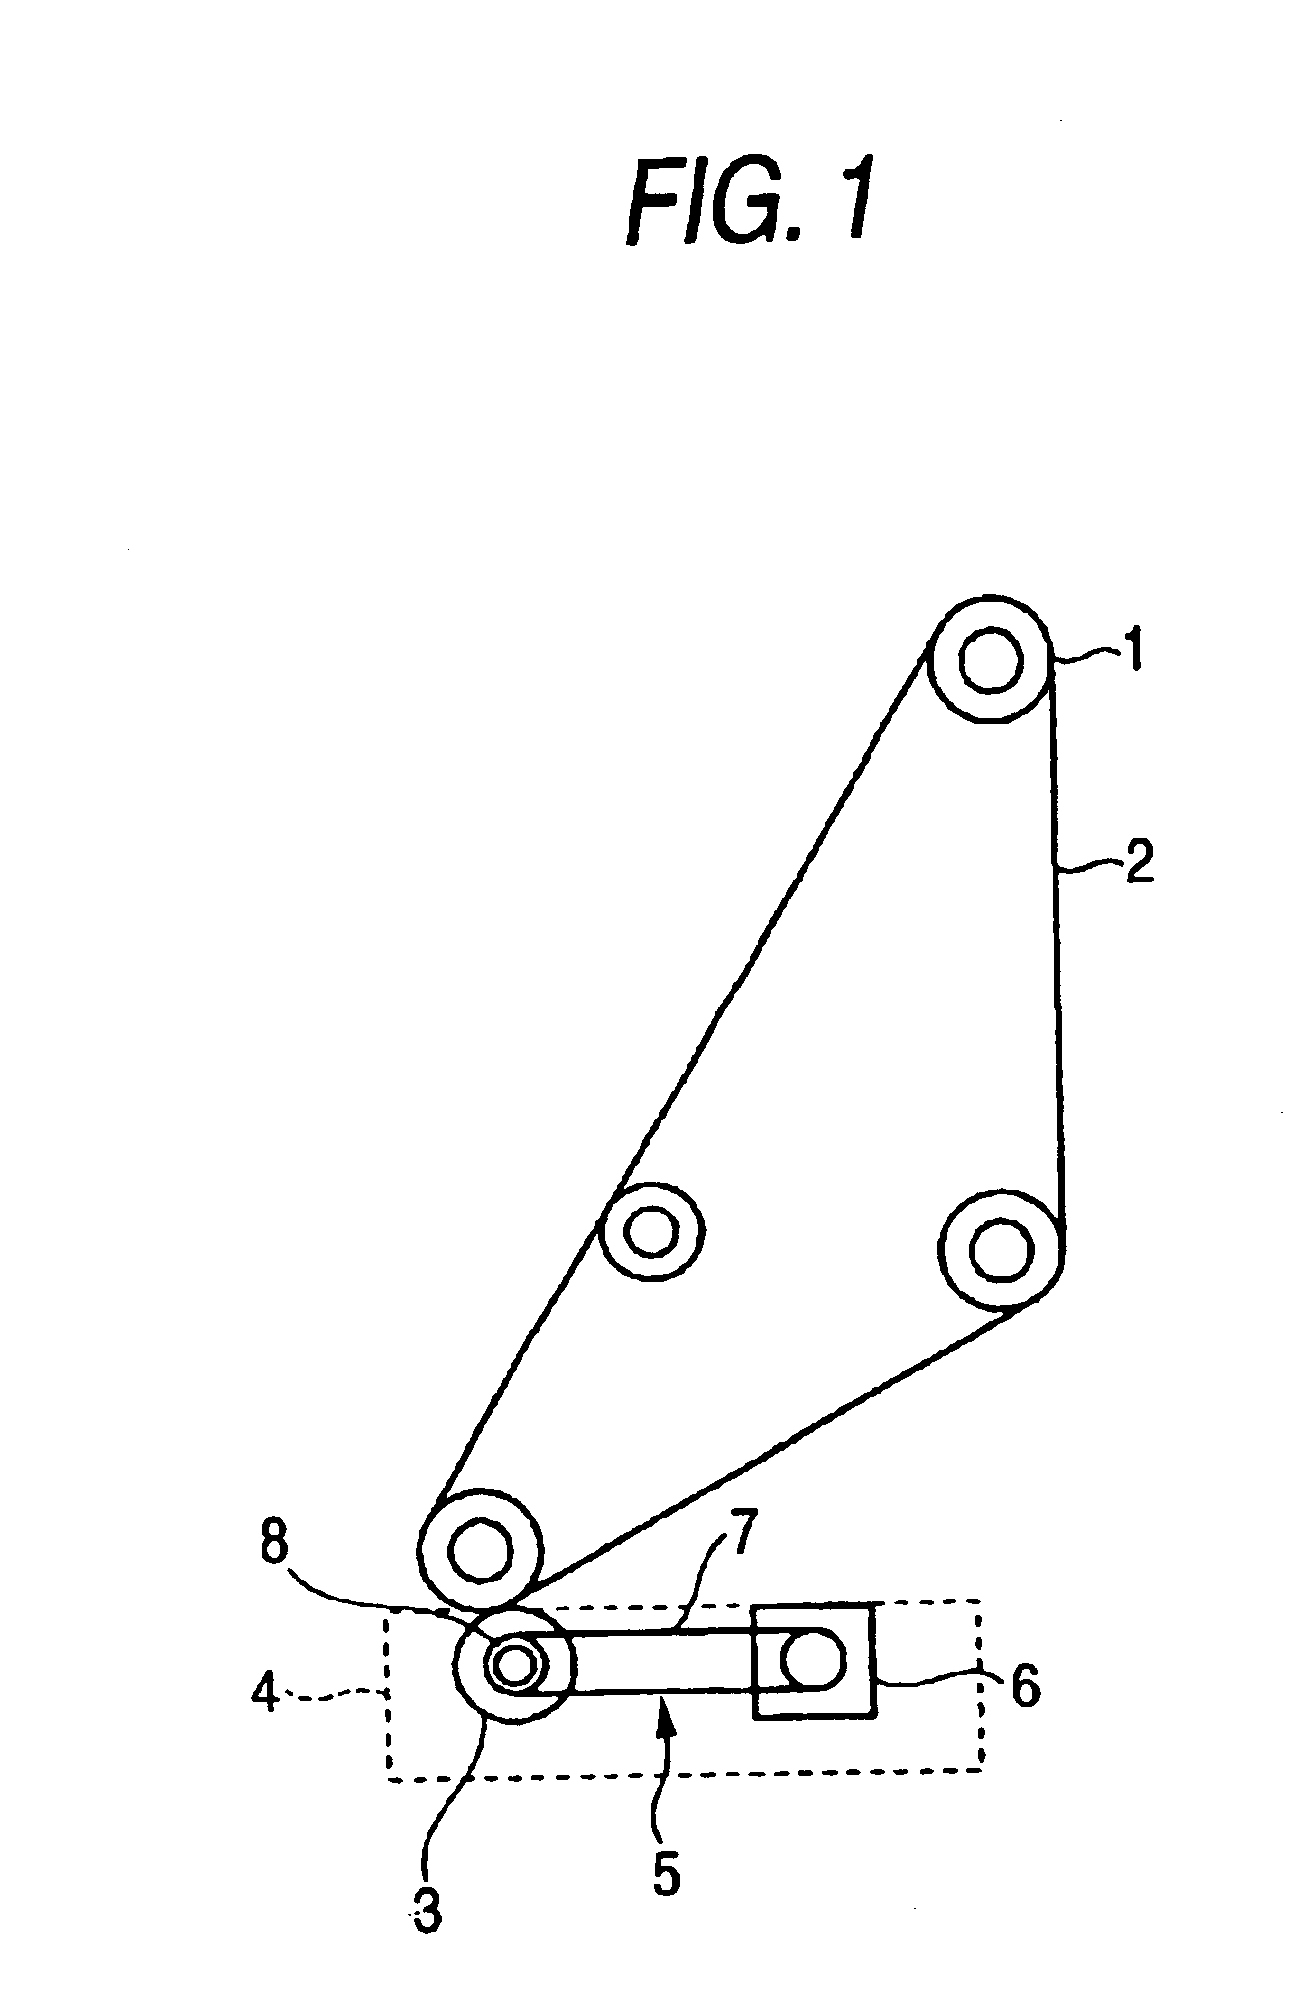 Image forming apparatus including image transporting belt and rotary roll